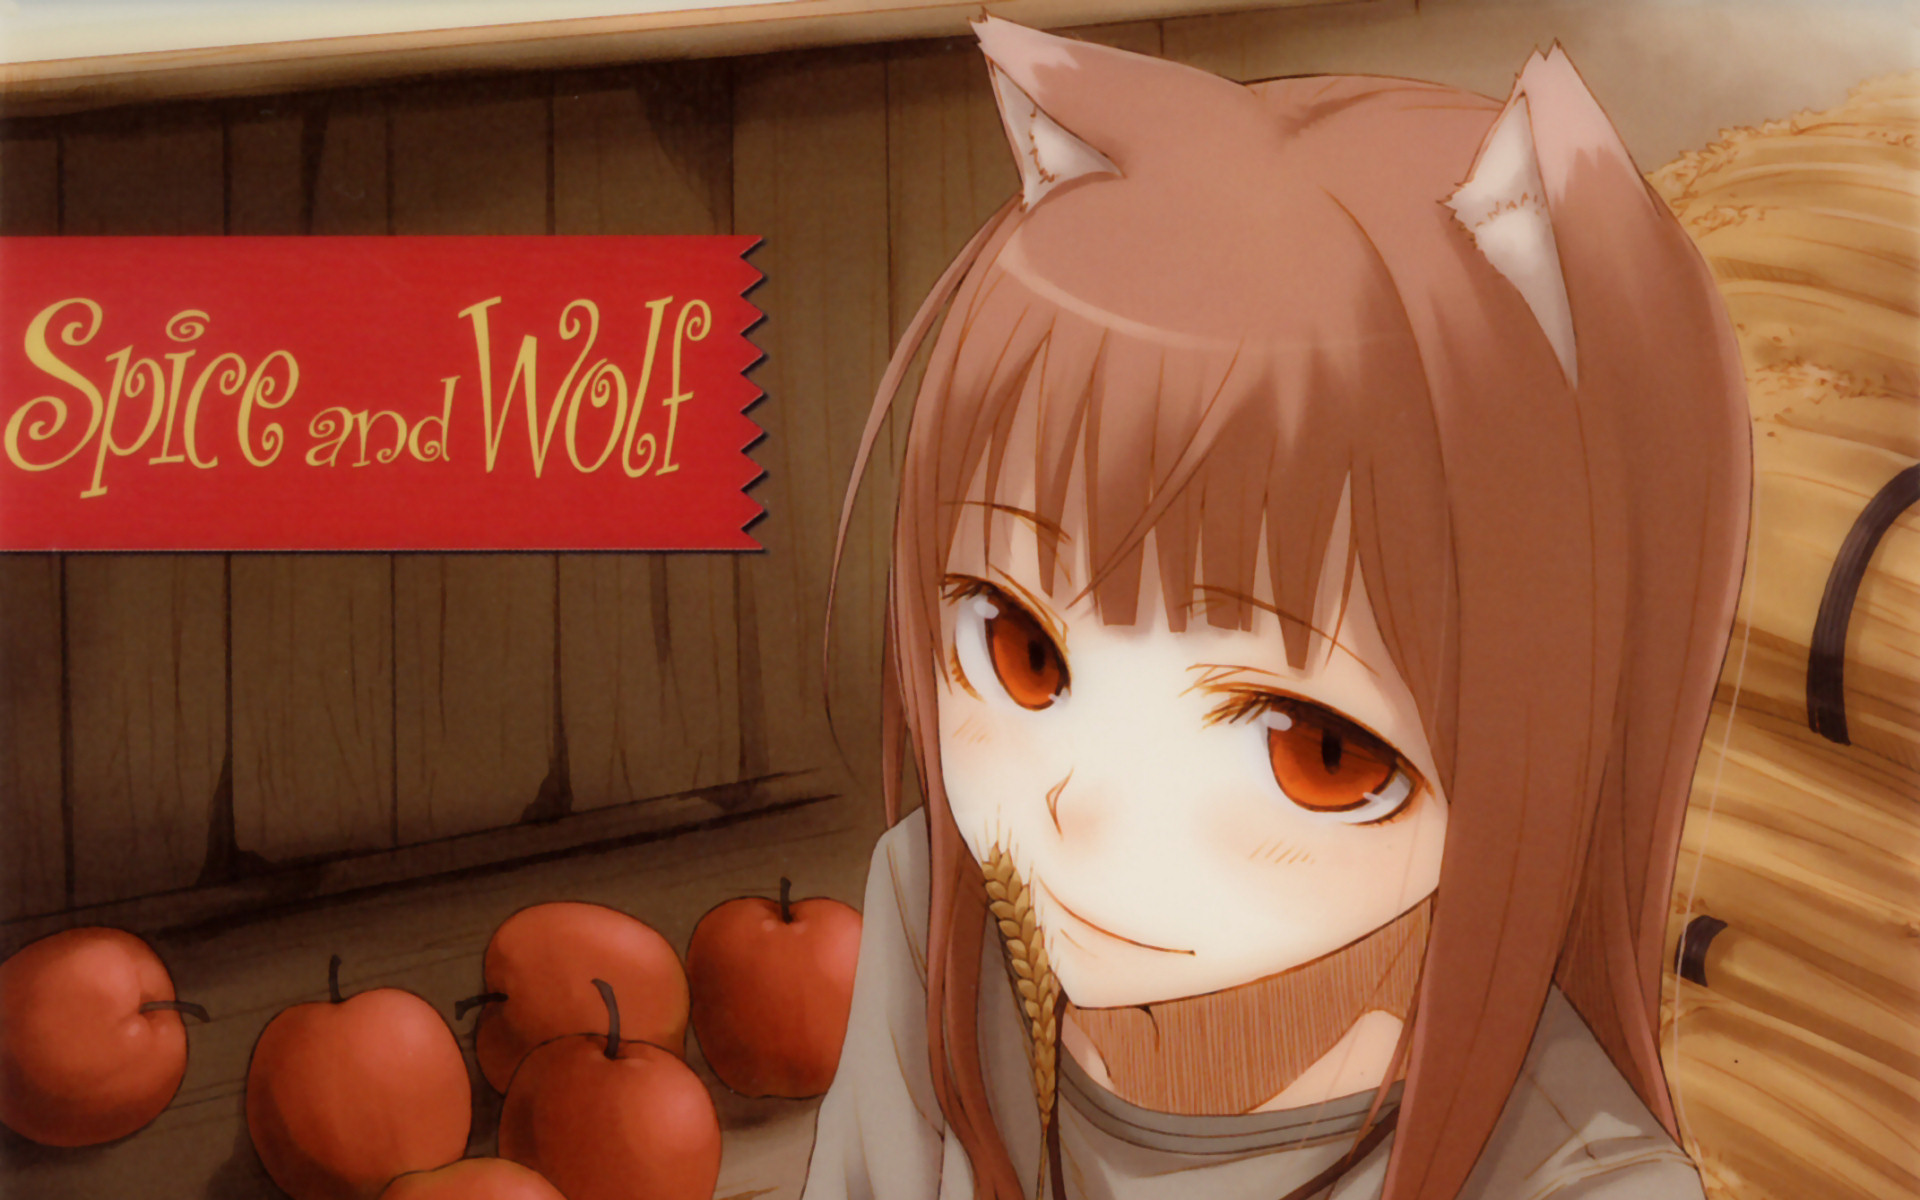 Beautiful illustration of Holo (Spice & Wolf) in high definition wallpaper quality.